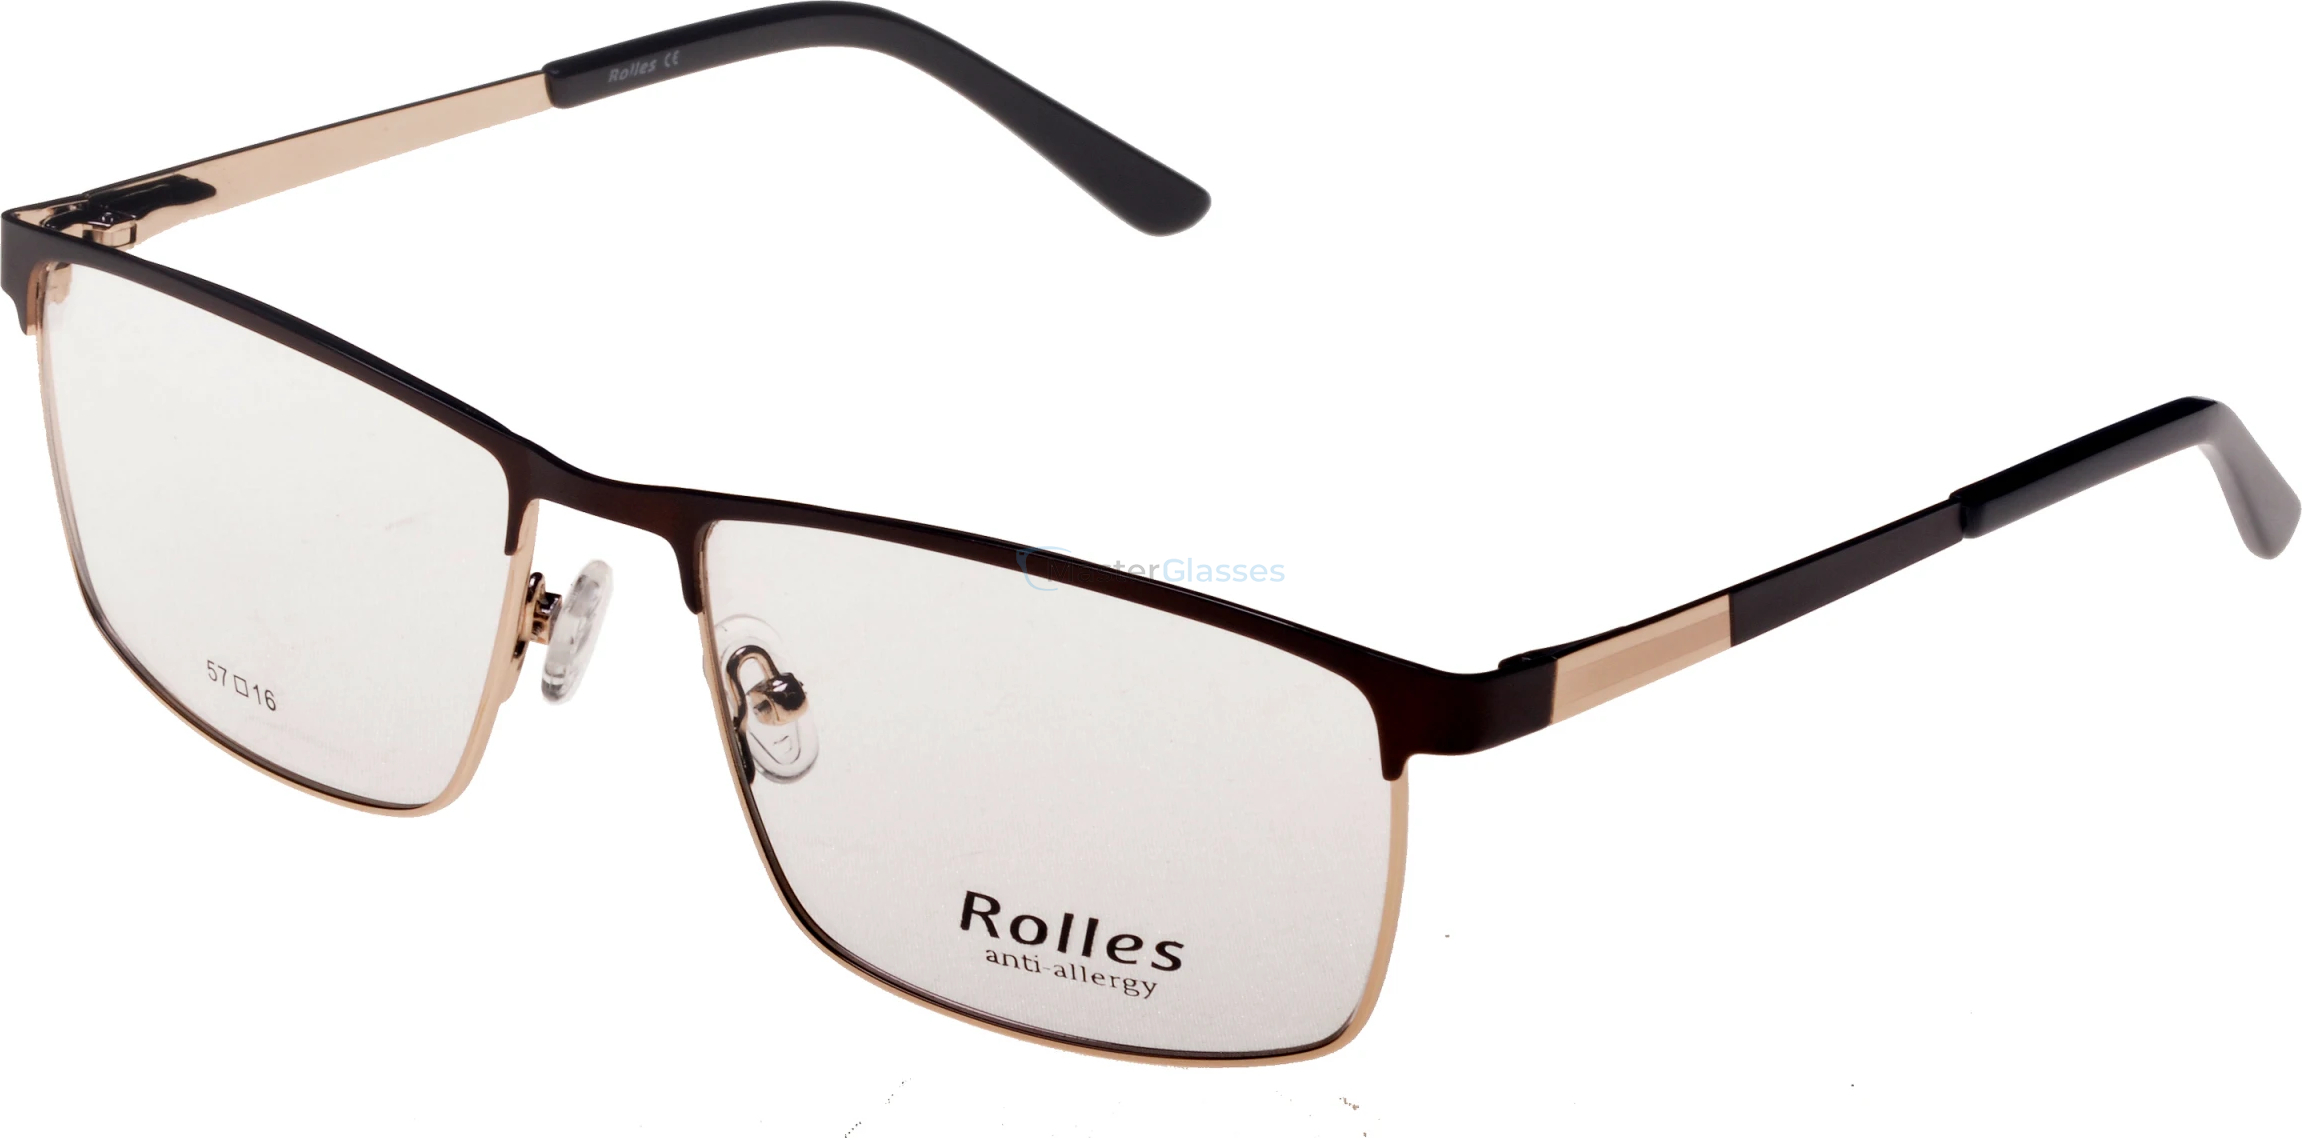  Rolles 676 01 57-16-140